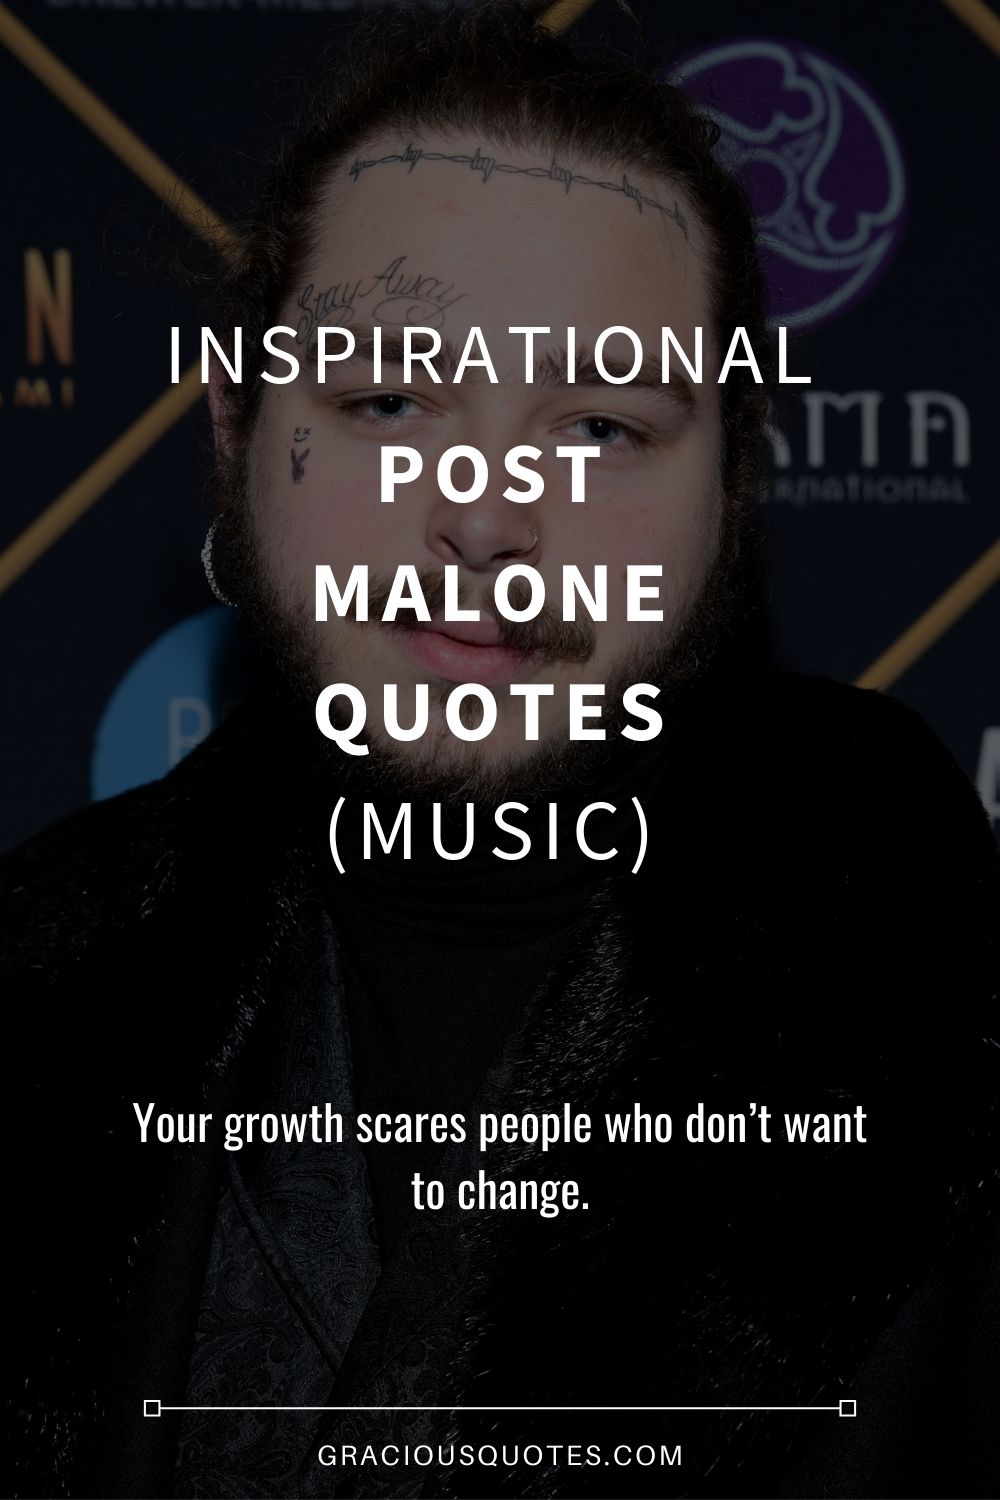 Inspirational Post Malone Quotes (MUSIC) - Gracious Quotes